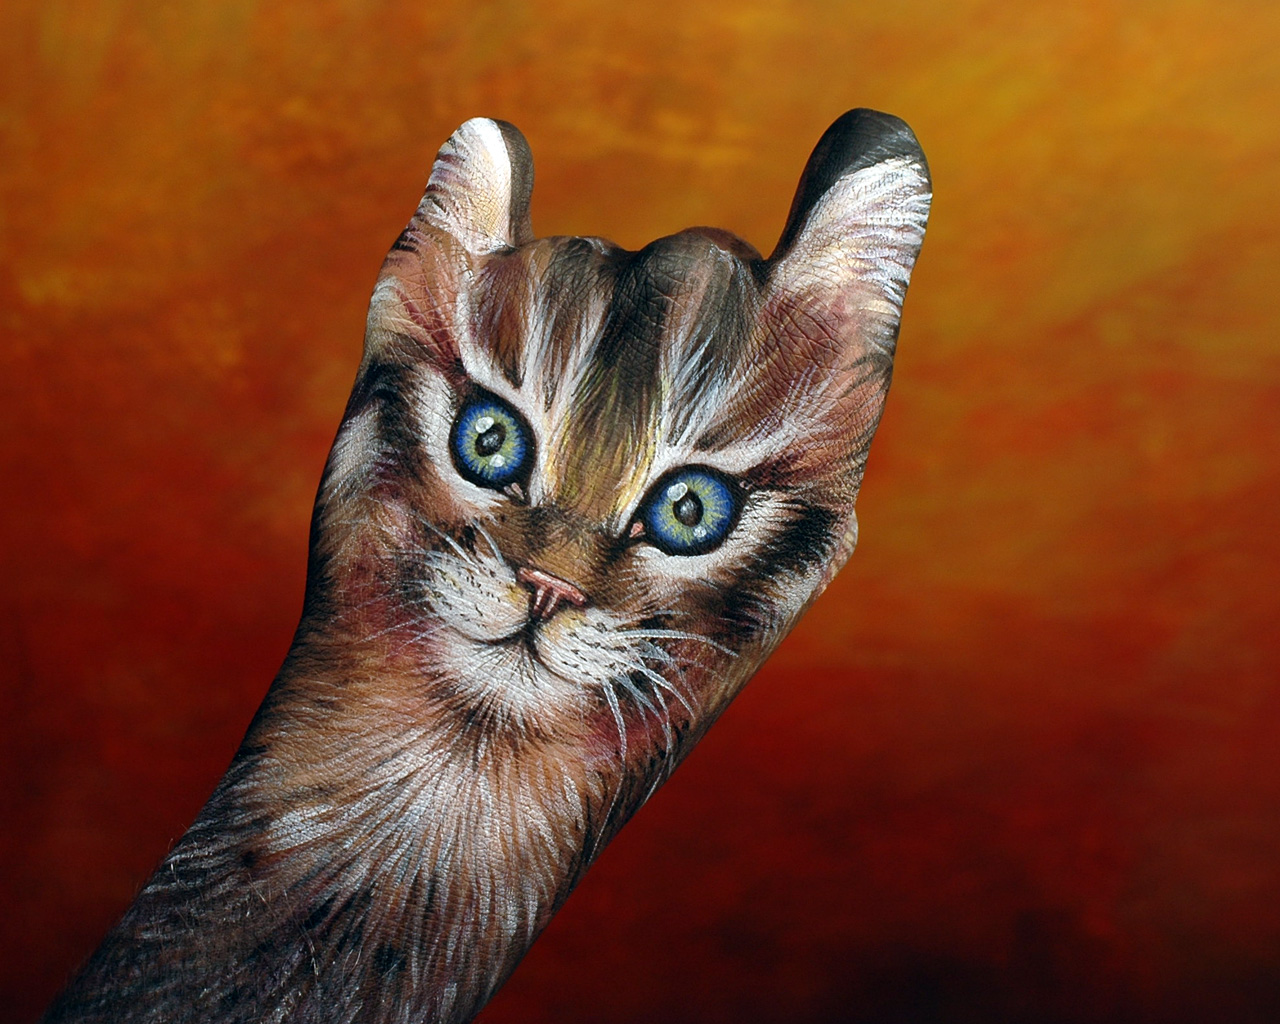 Hand Painting Wallpaper - Body Painting Animals Hands - HD Wallpaper 